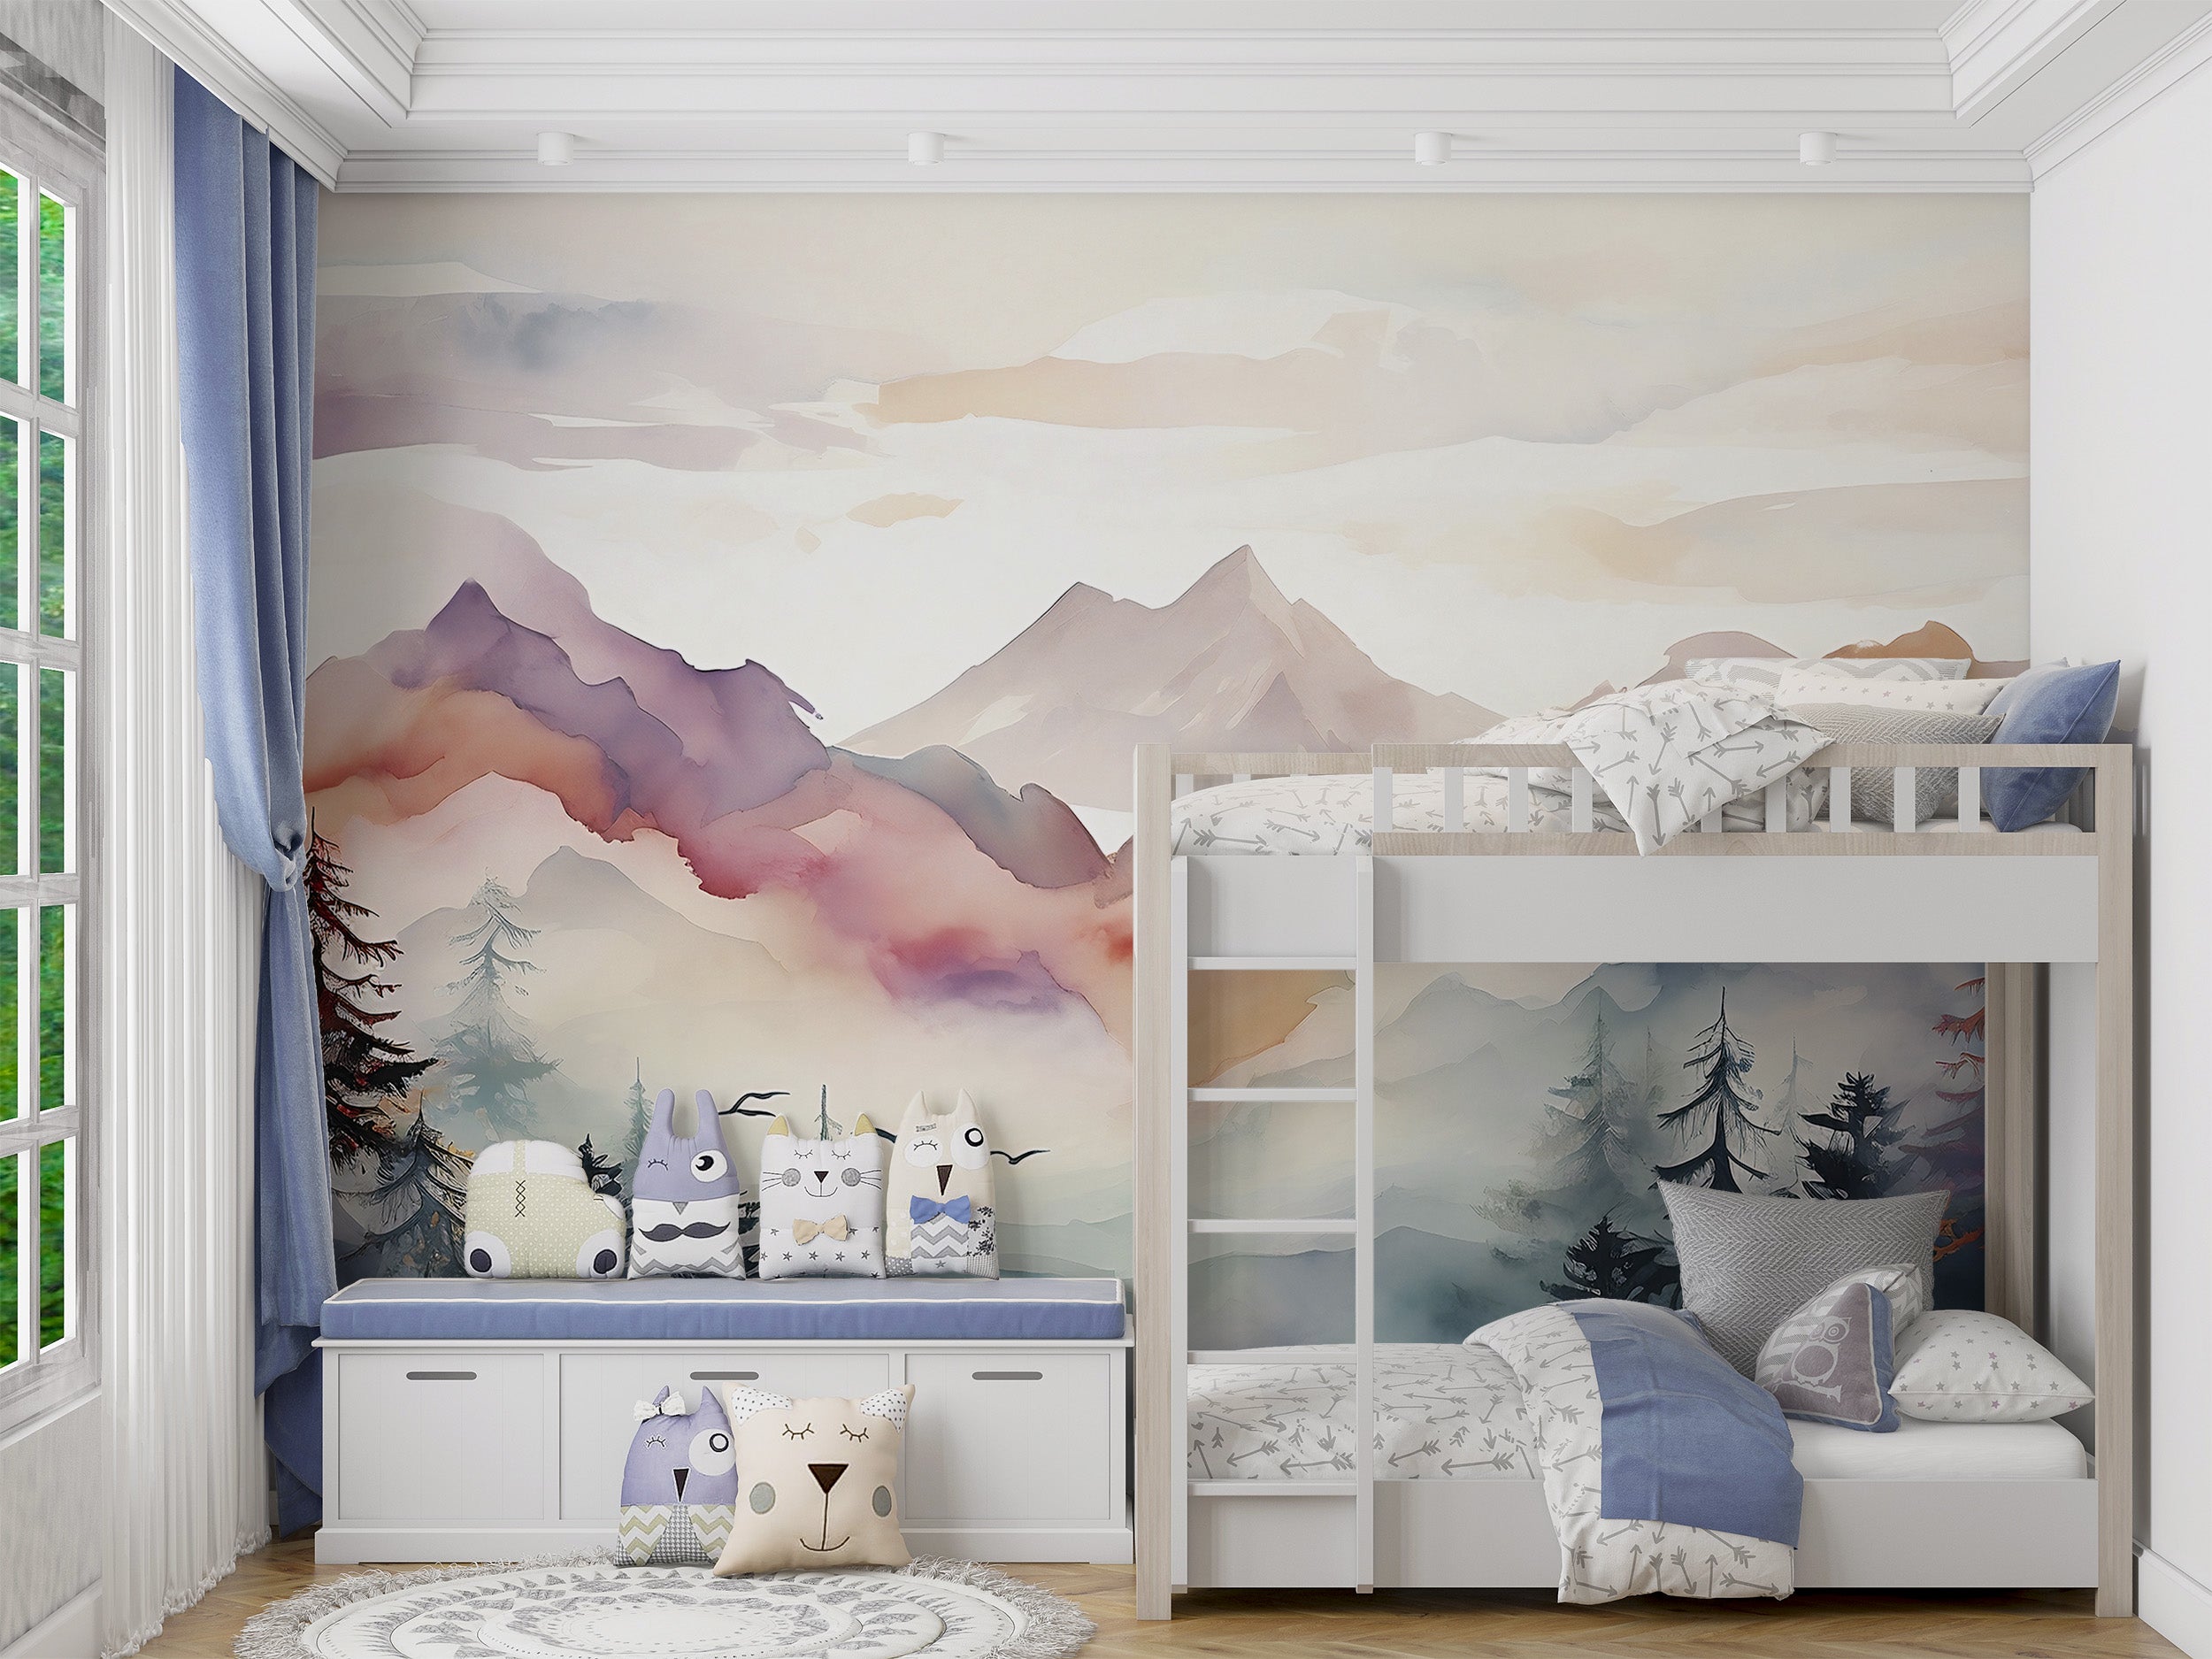 Seamless Blend of Color and Texture in Mountain Mural